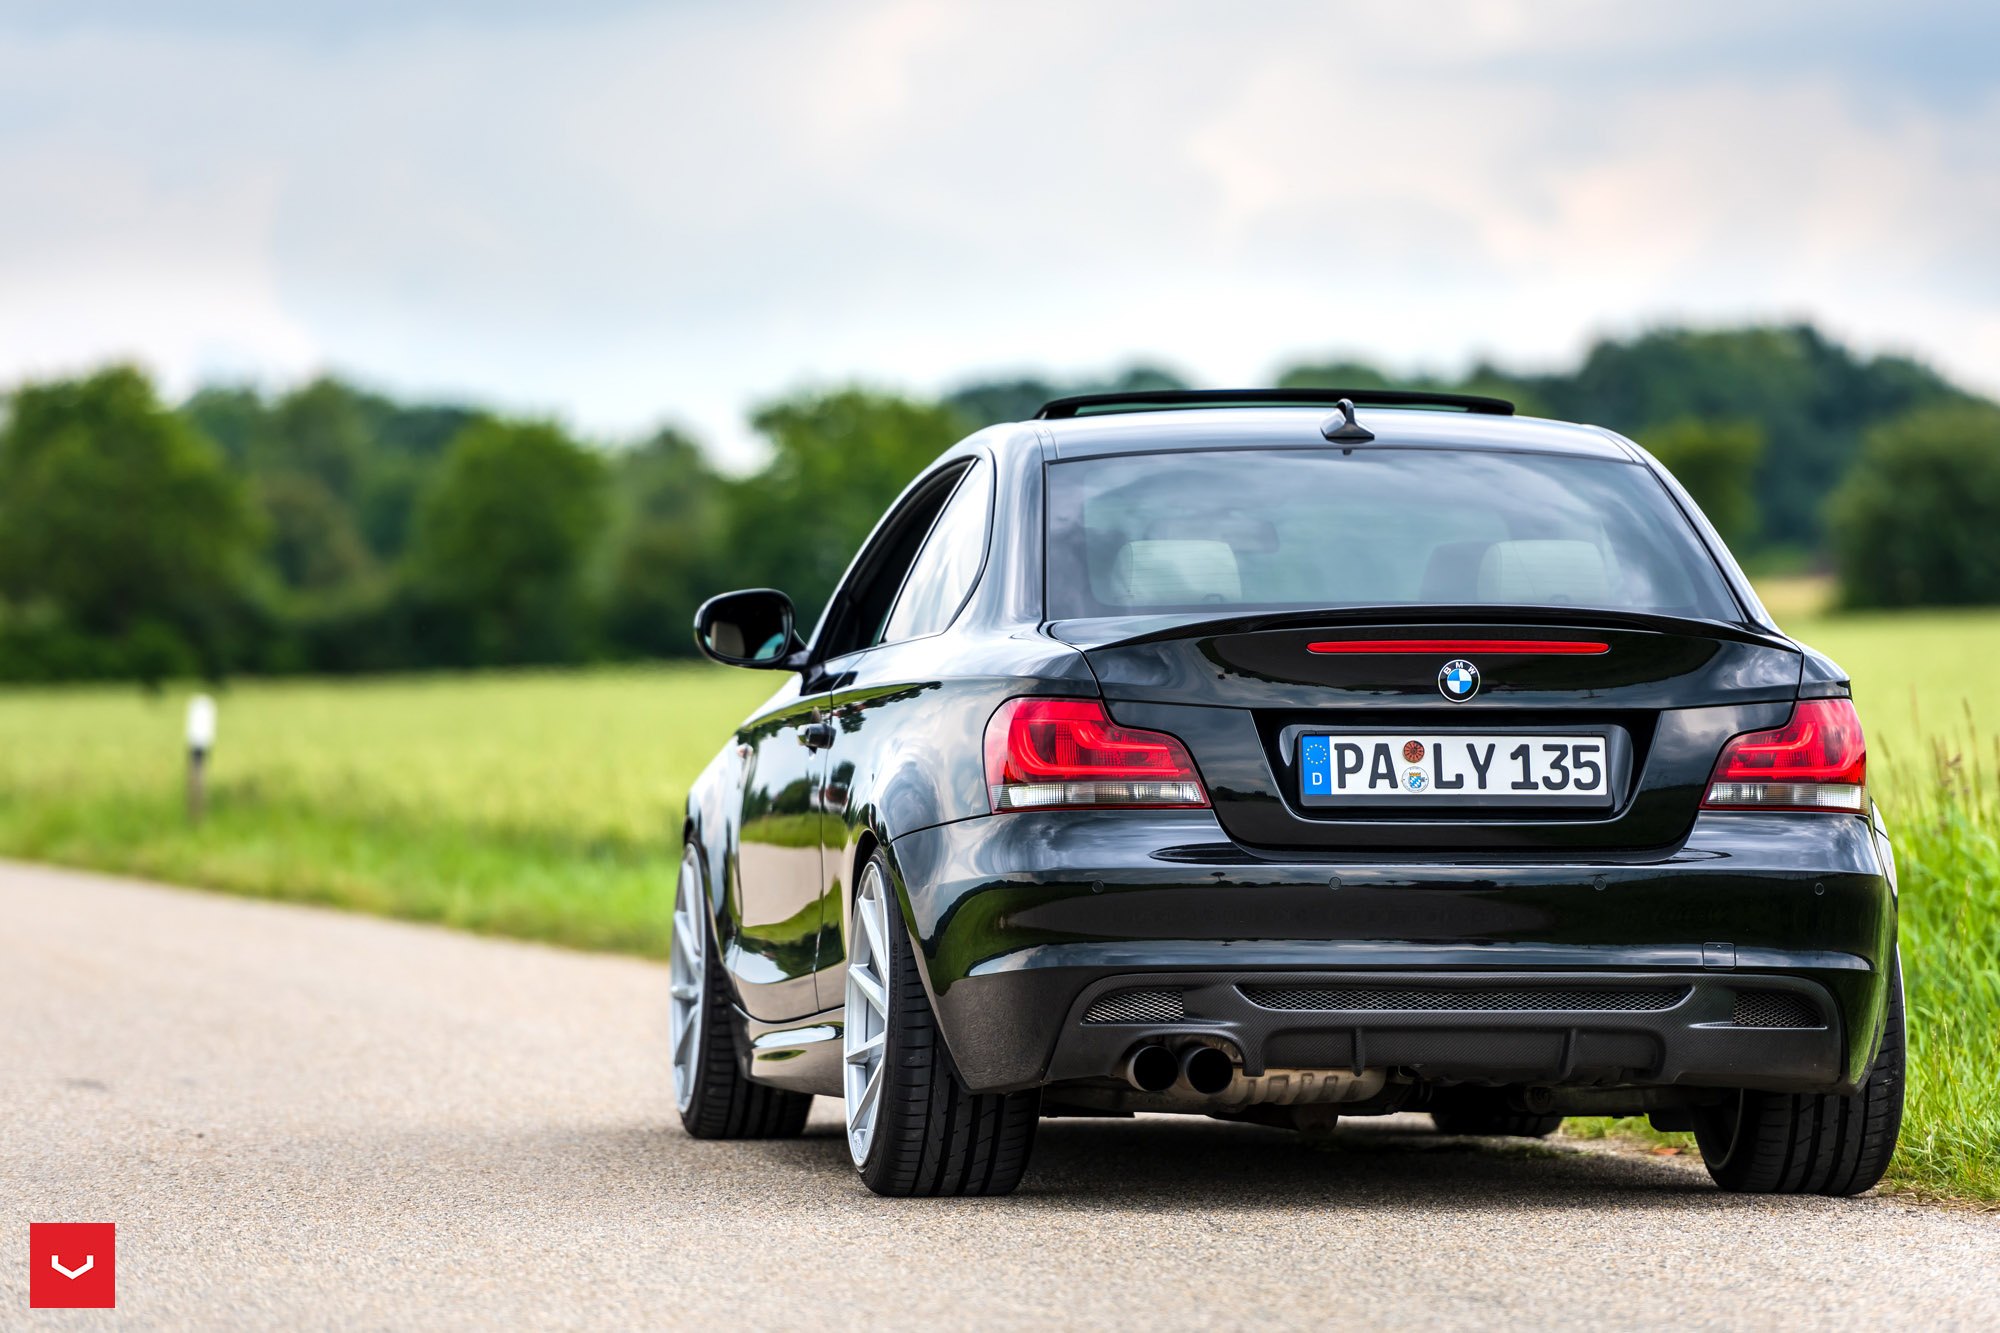 Aftermarket Rear Diffuser with Dual Exhaust Tips on BMW 1-Series - Photo by Vossen